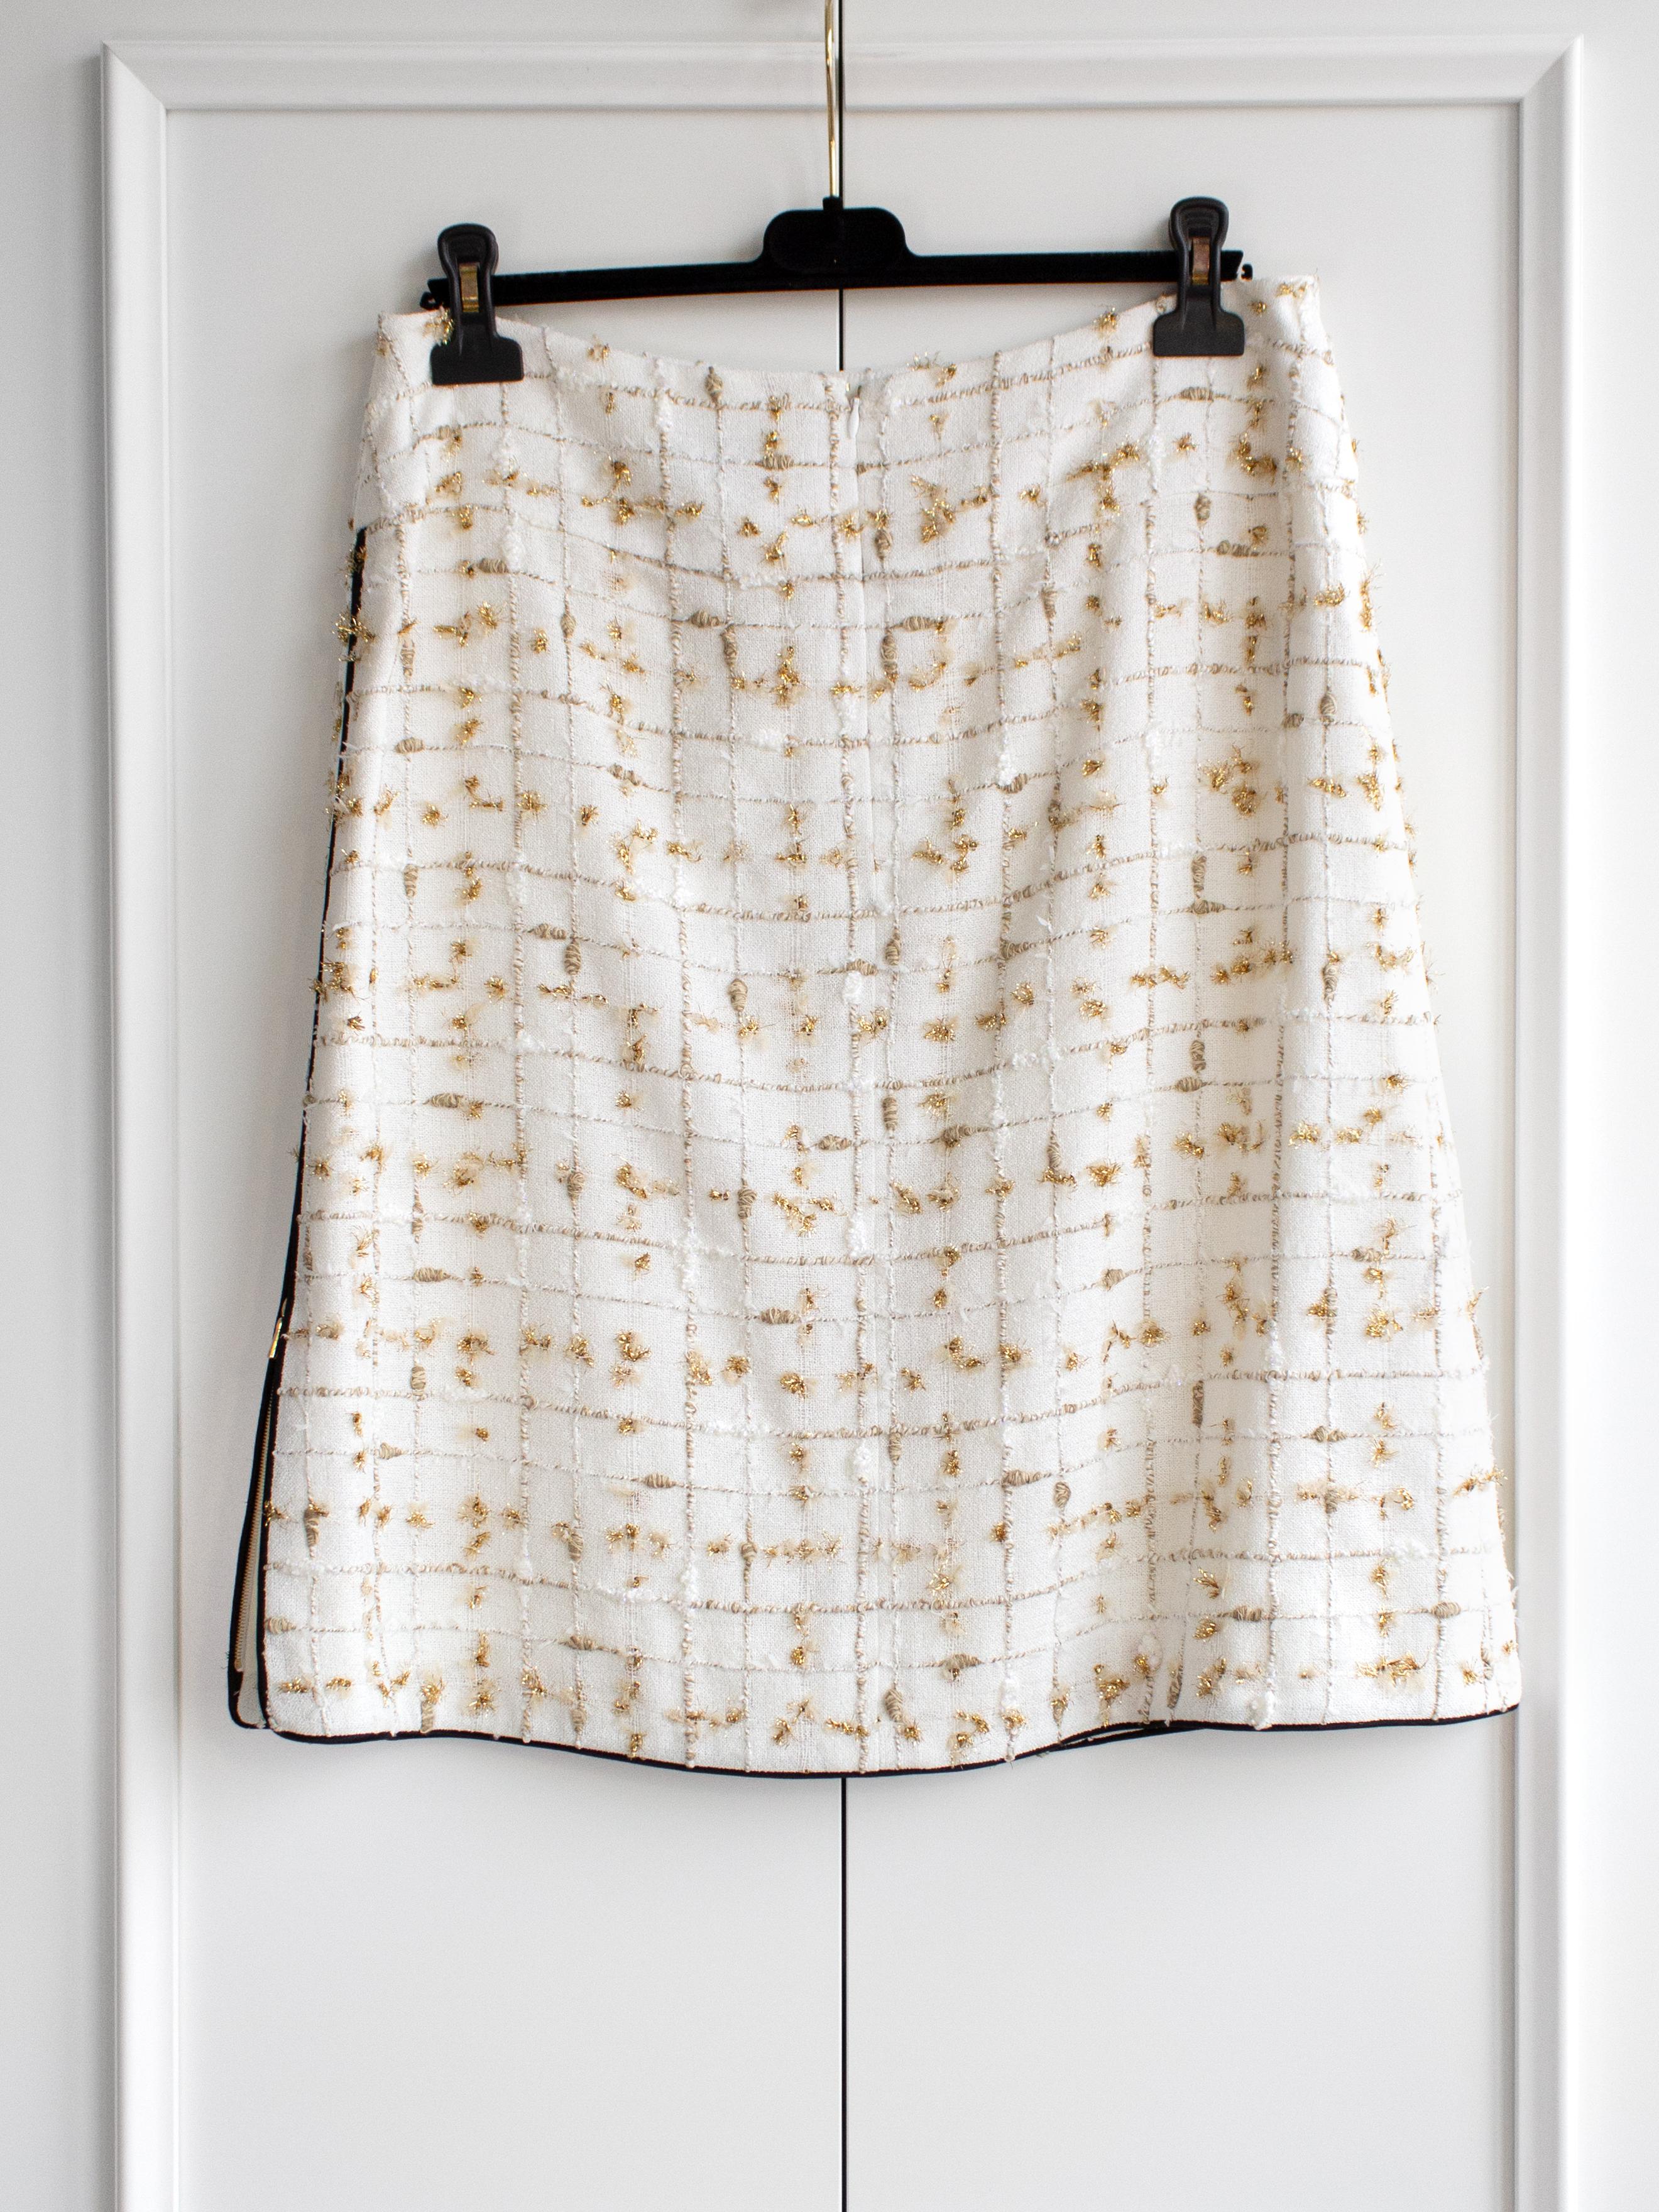 Women's NWT Chanel S/S 2019 By The Sea White Gold Embellished 19P 19S Midi Skirt  For Sale